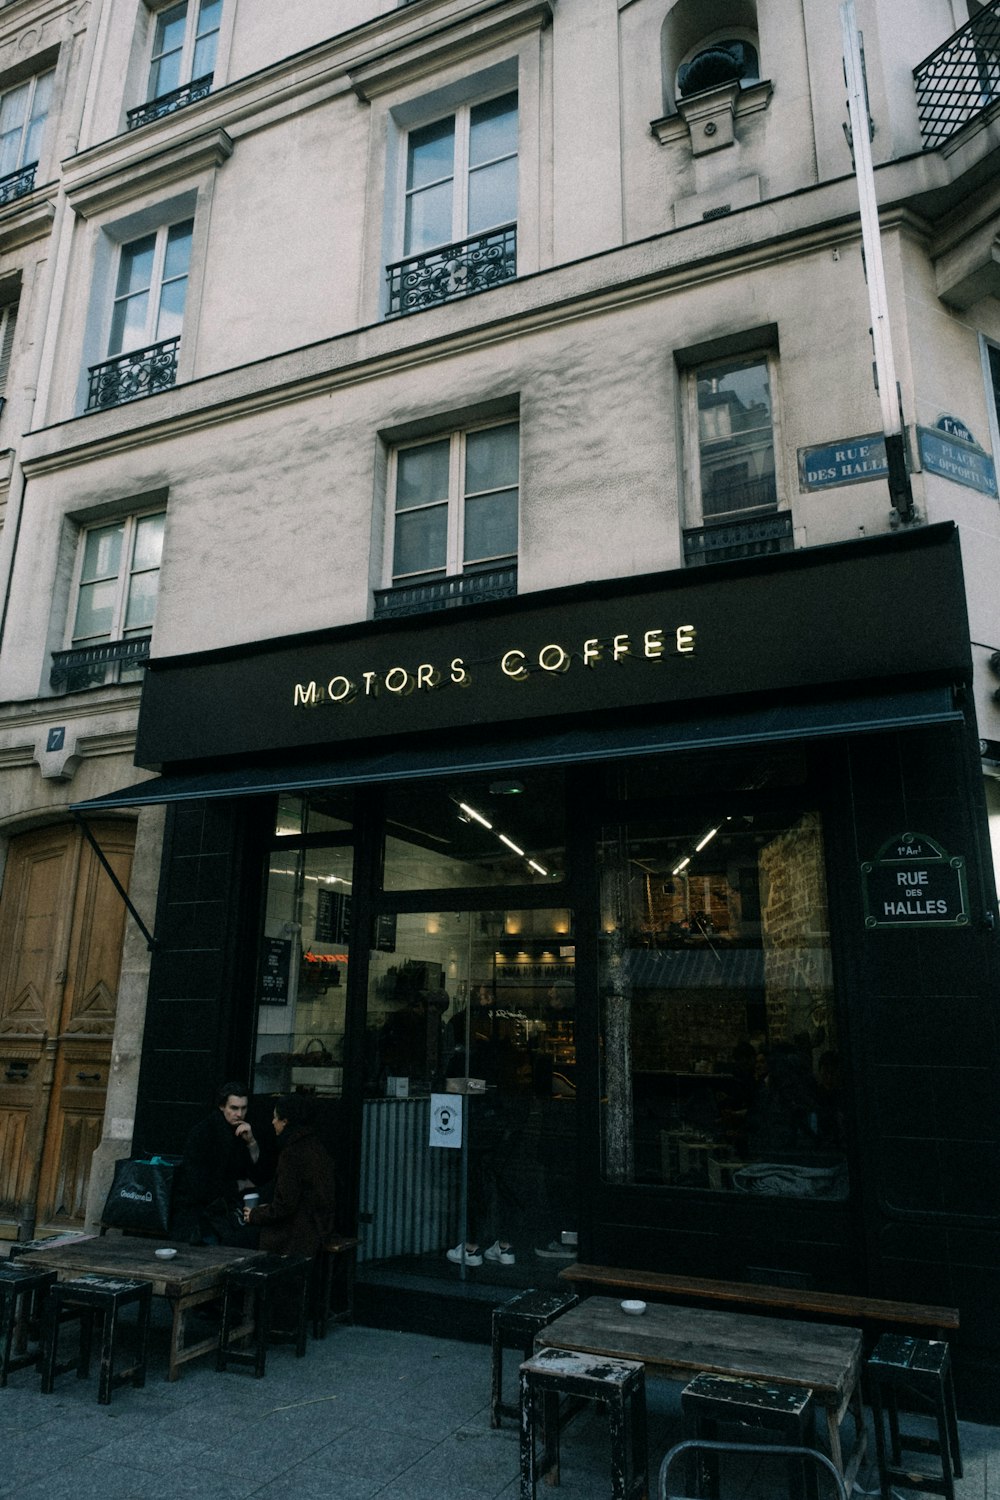 a coffee shop on the corner of a street